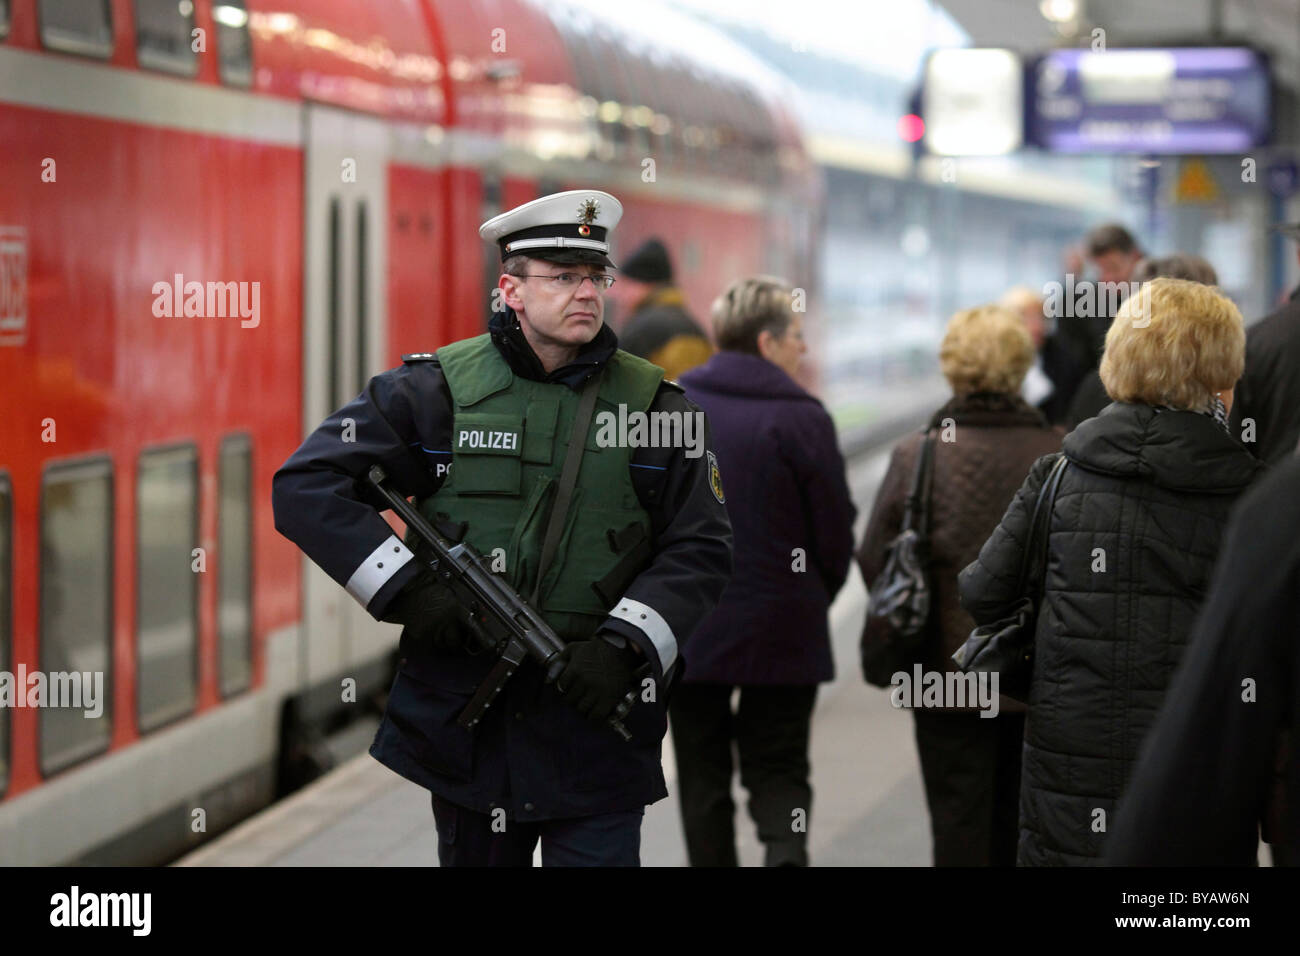 Officers of the Federal police walking the beat at the main railway station in Koblenz, Rhineland-Palatinate, Germany, Europe Stock Photo